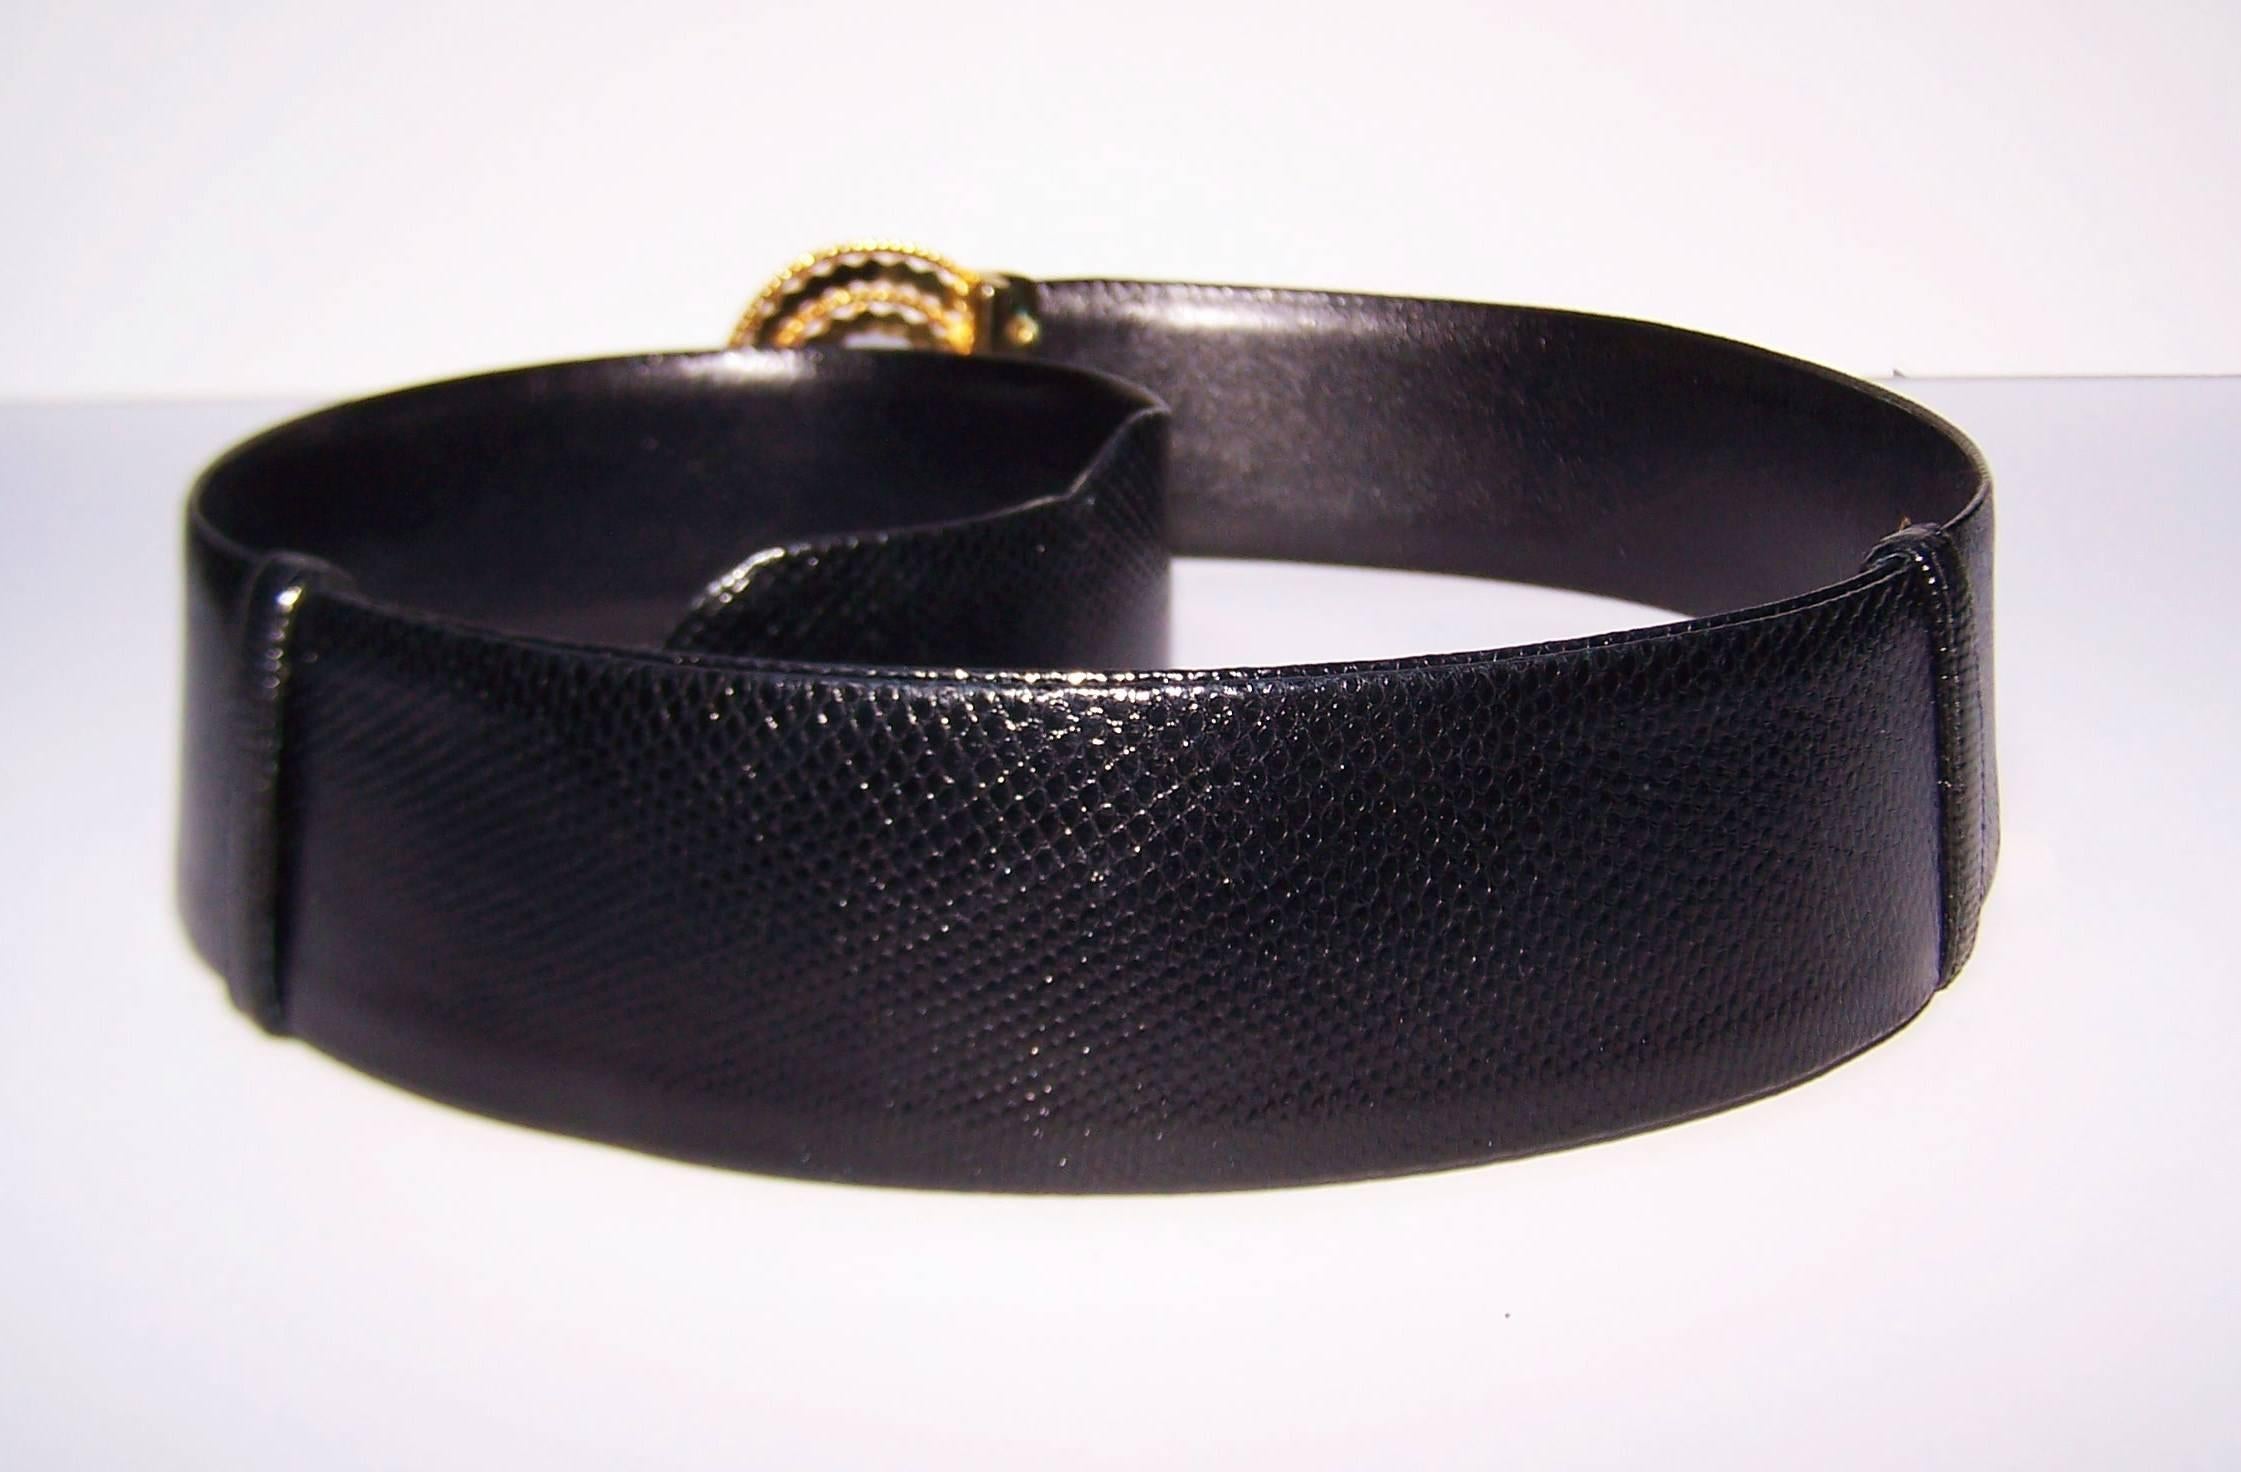 C.1990 Judith Leiber Black Lizard Belt With Cabochon Bejeweled Buckle 3